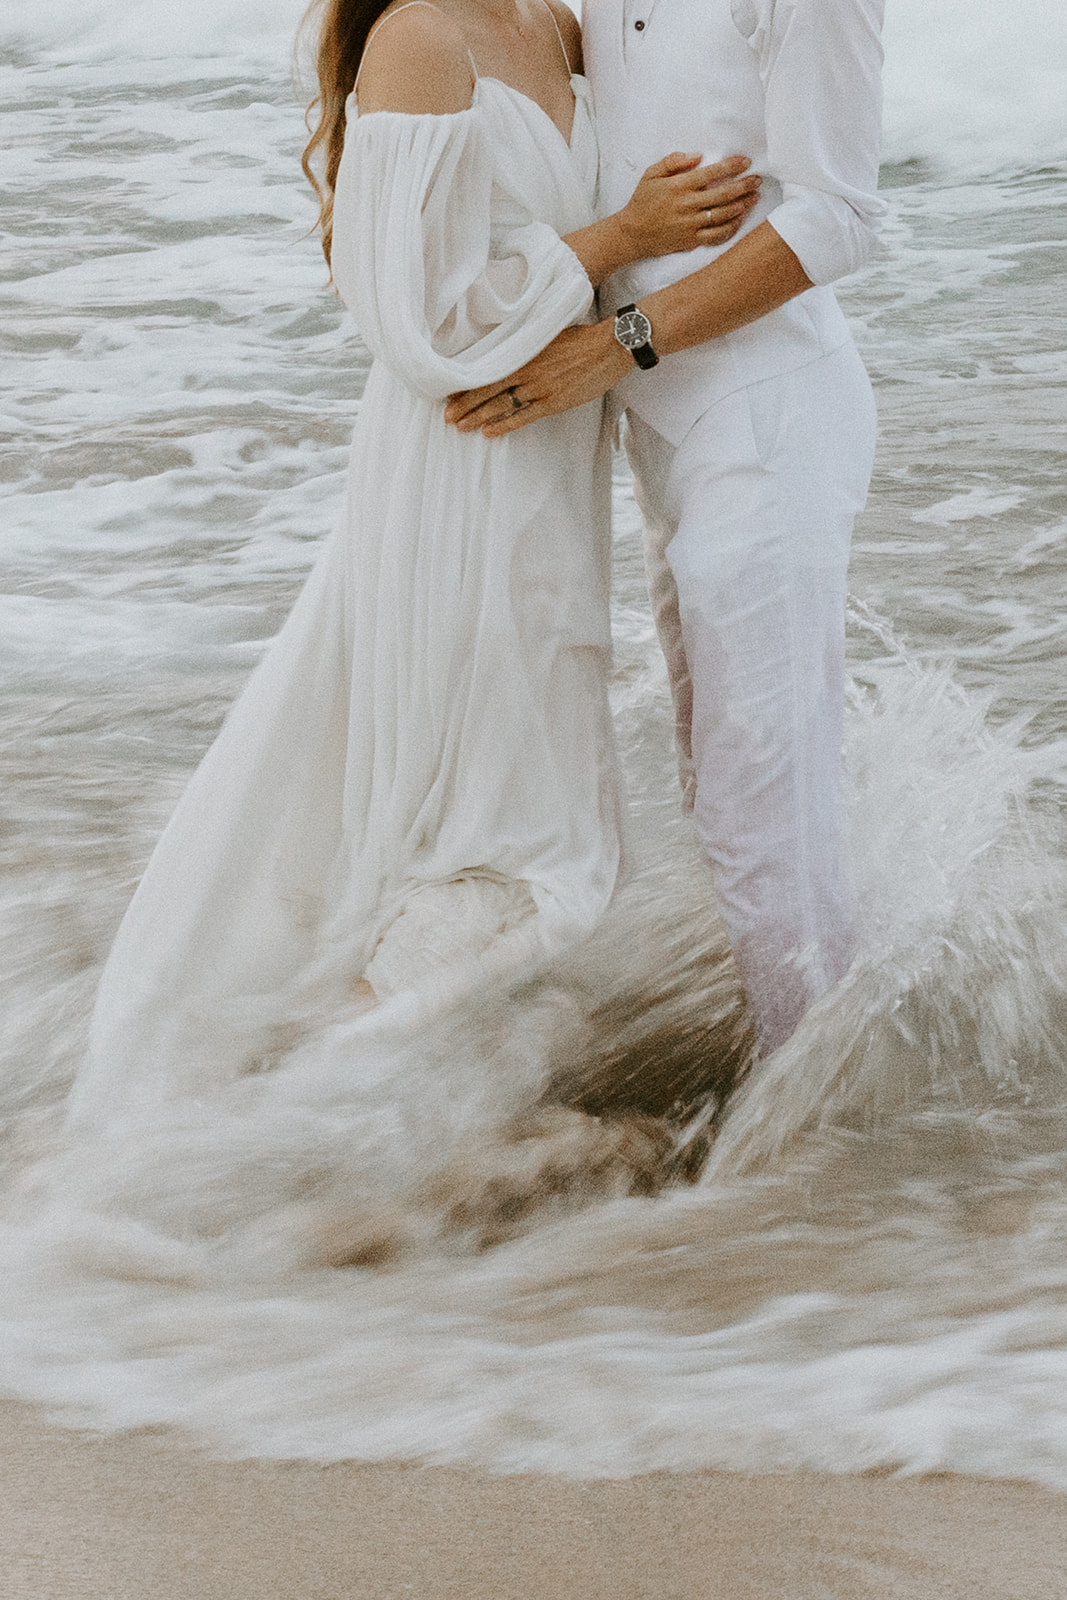 A couples runs into the ocean for their Hawaii trash the dress session 